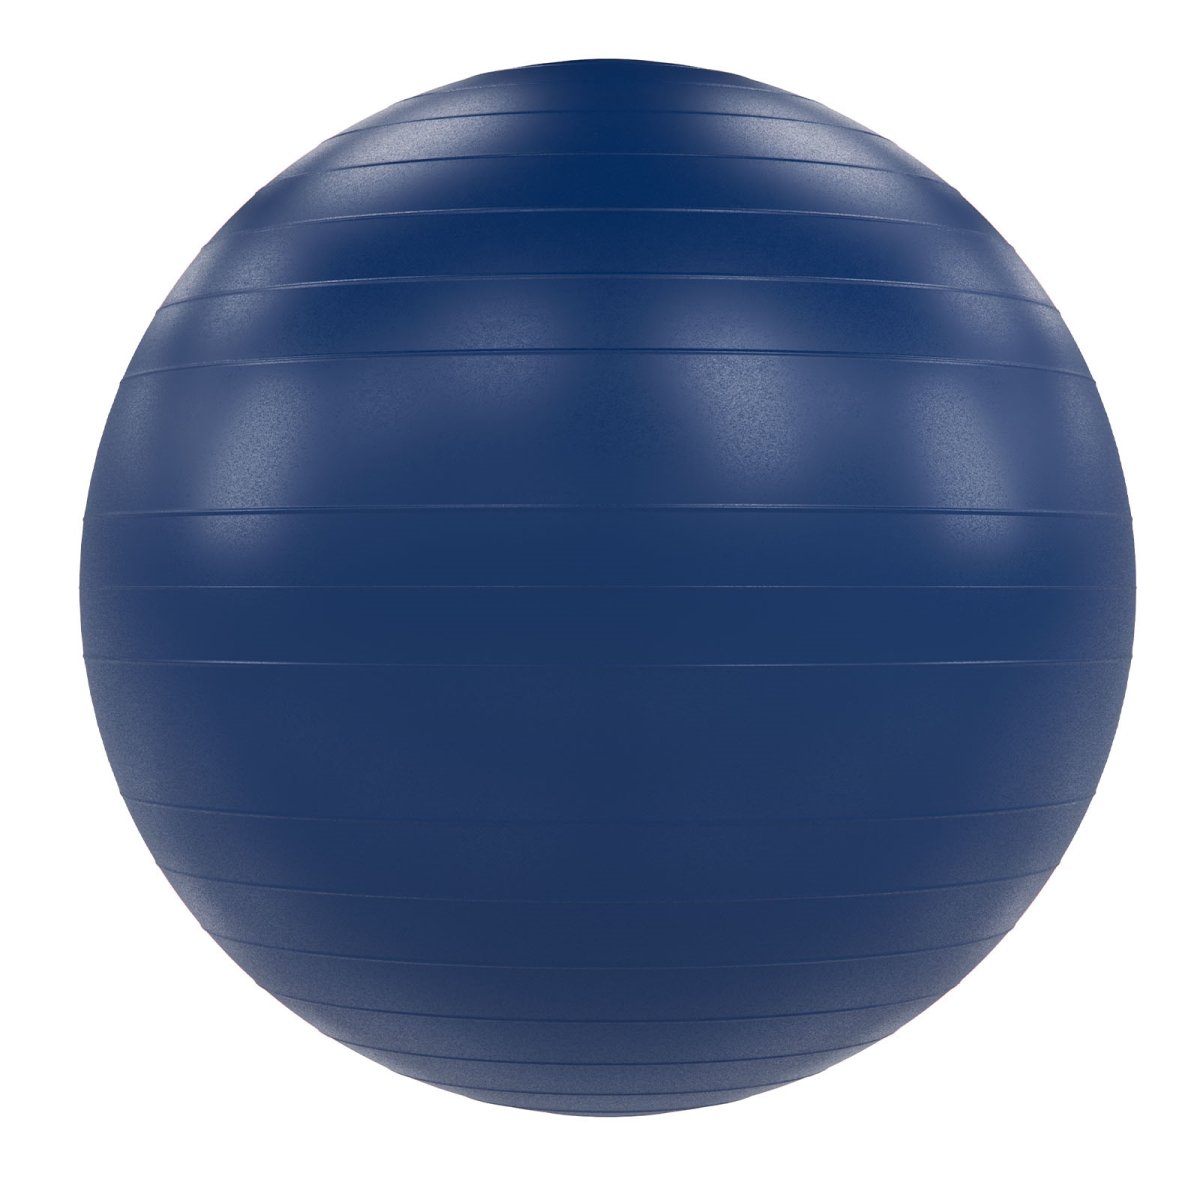 Picture of Power Systems 80758 VersaBall Pro 65cm - Navy